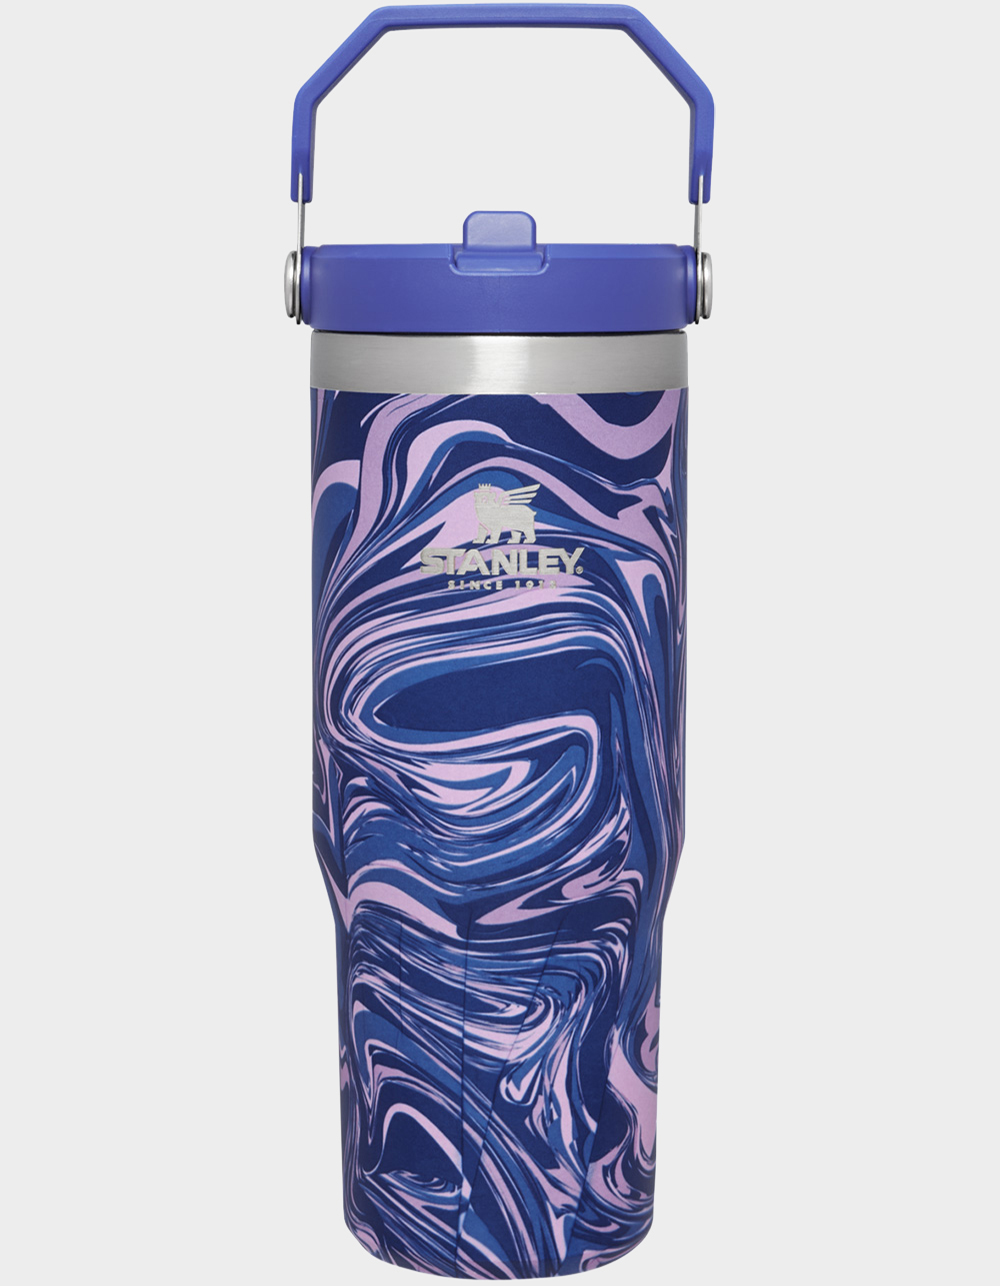 Stanley Stainless Steel 30oz Tumbler Flipstraw Leakproof Vacuum Insulated  Water Bottle Lapis Blue Pool Blue Lapis Swirl Charcoal Gray Cream 